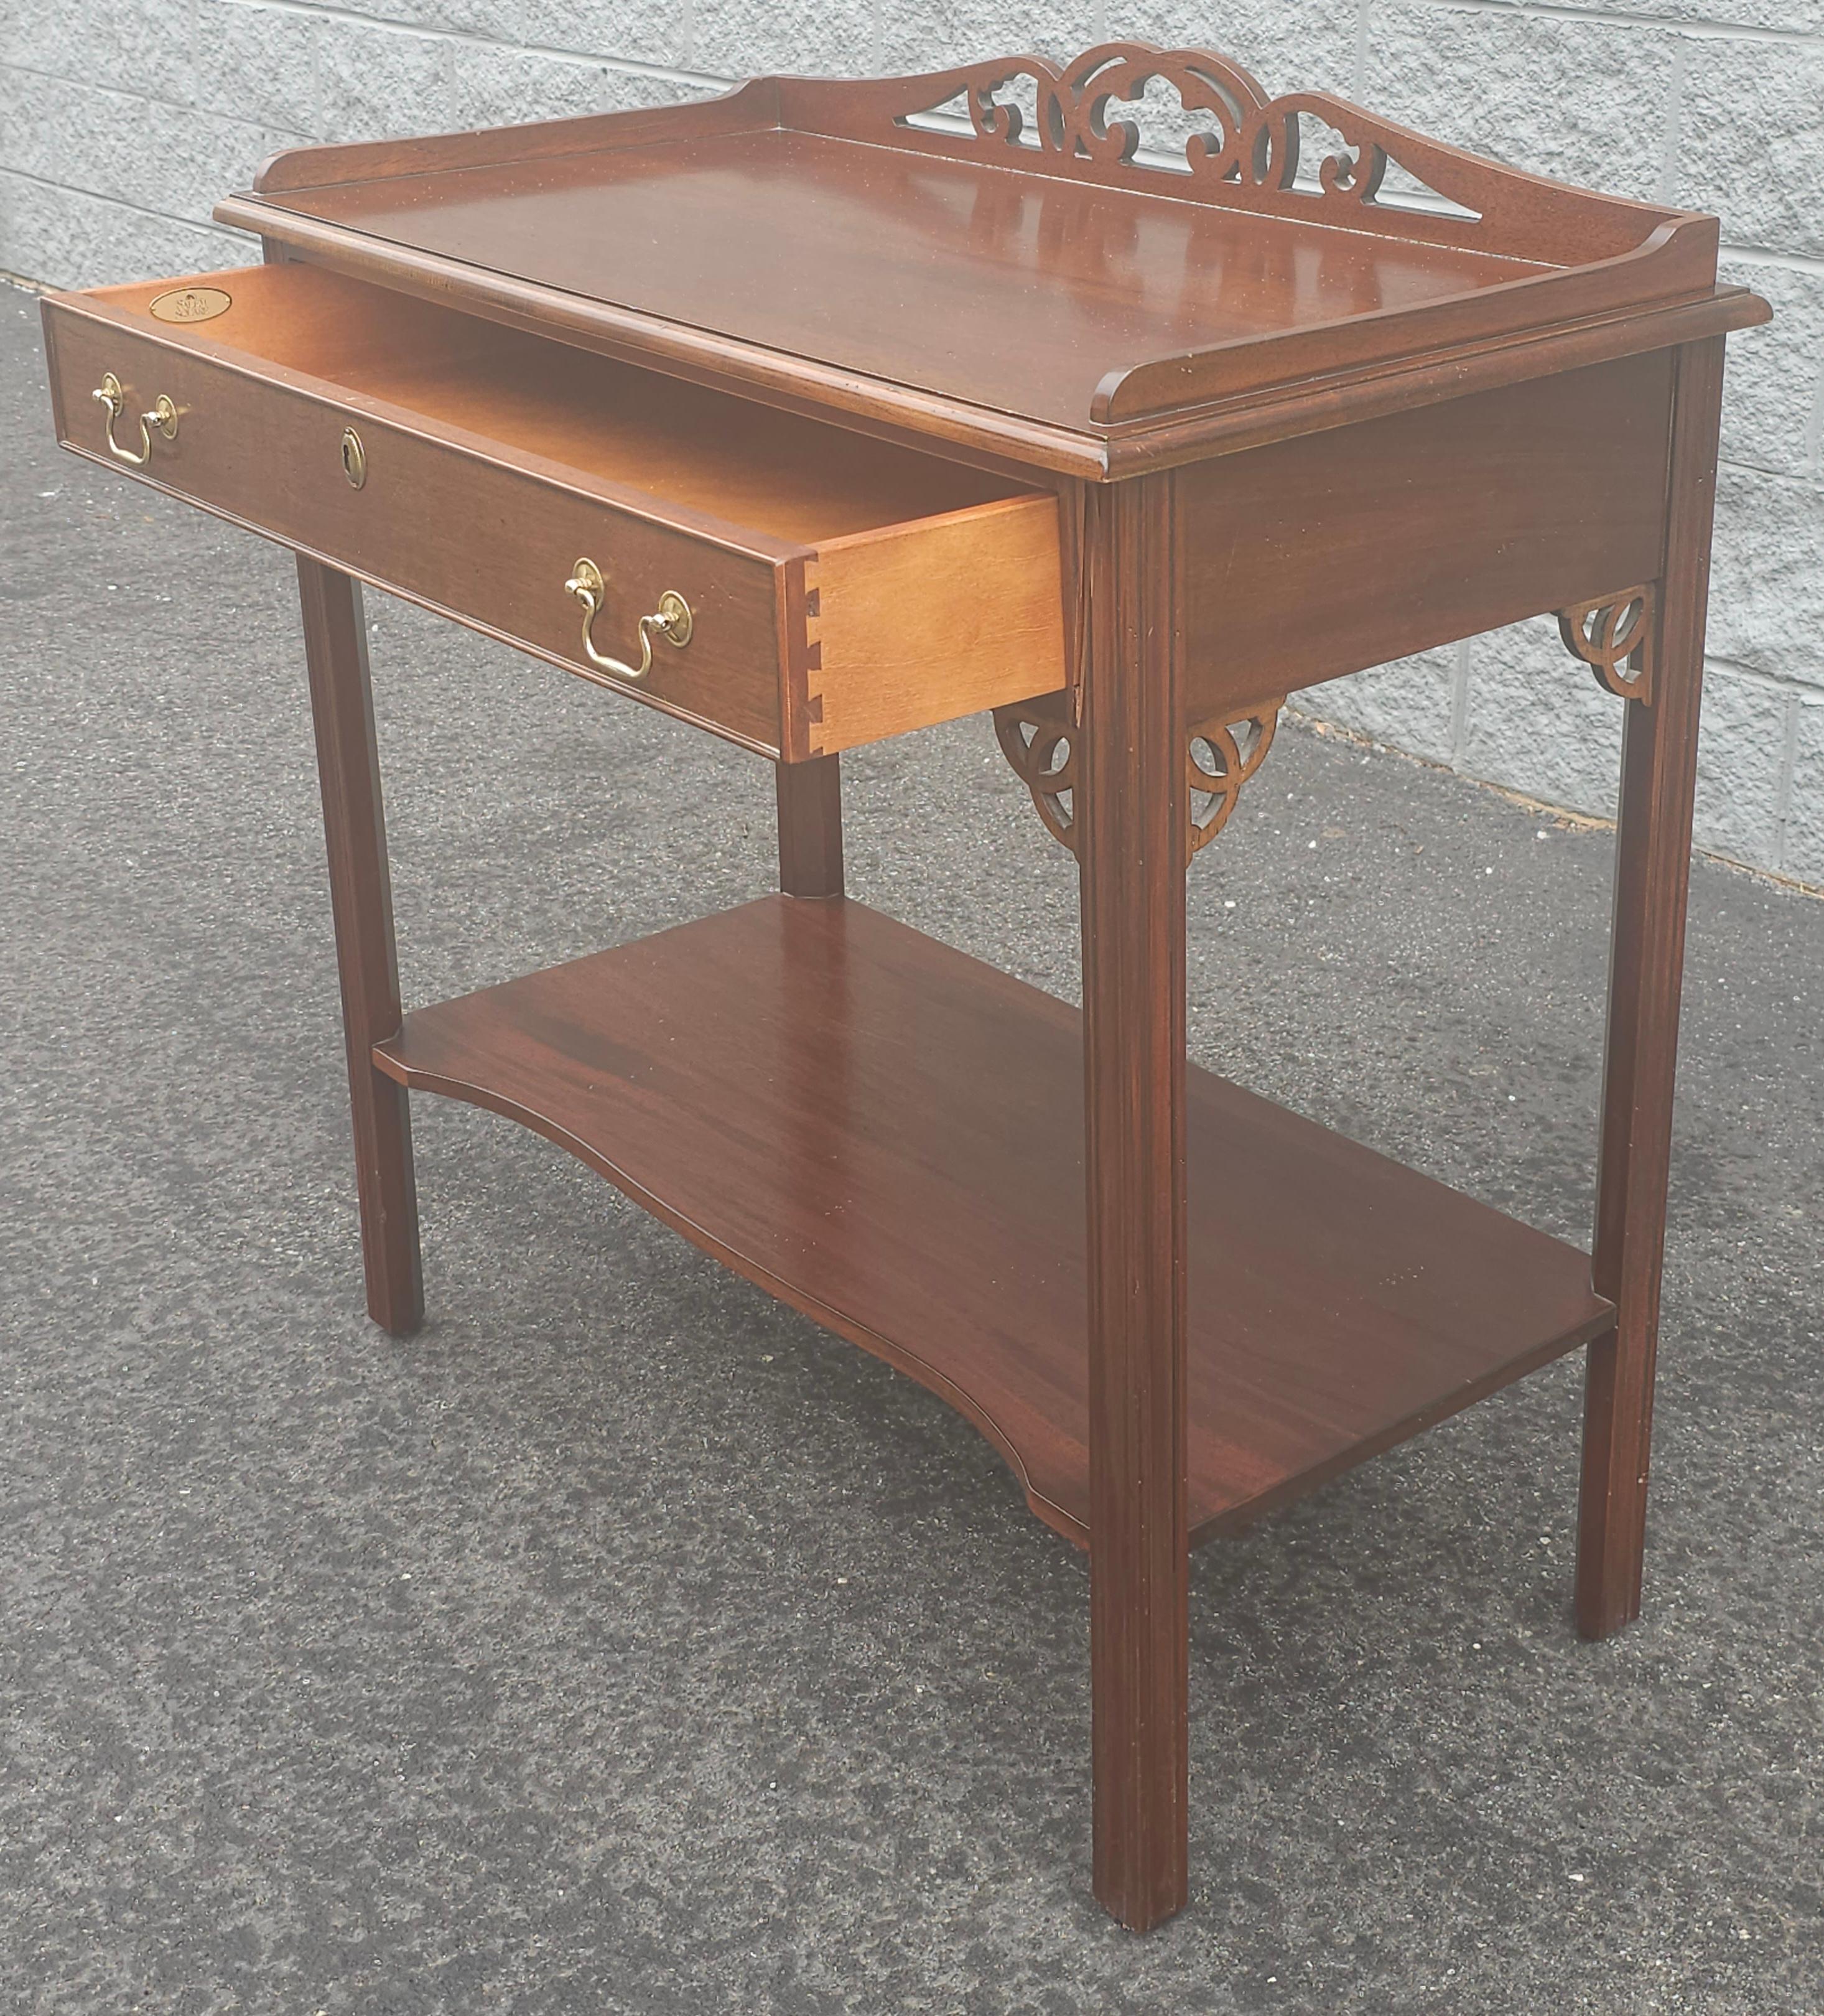 Early 21st Century Chippendale Mahogany Server  / Drybar In Good Condition For Sale In Germantown, MD